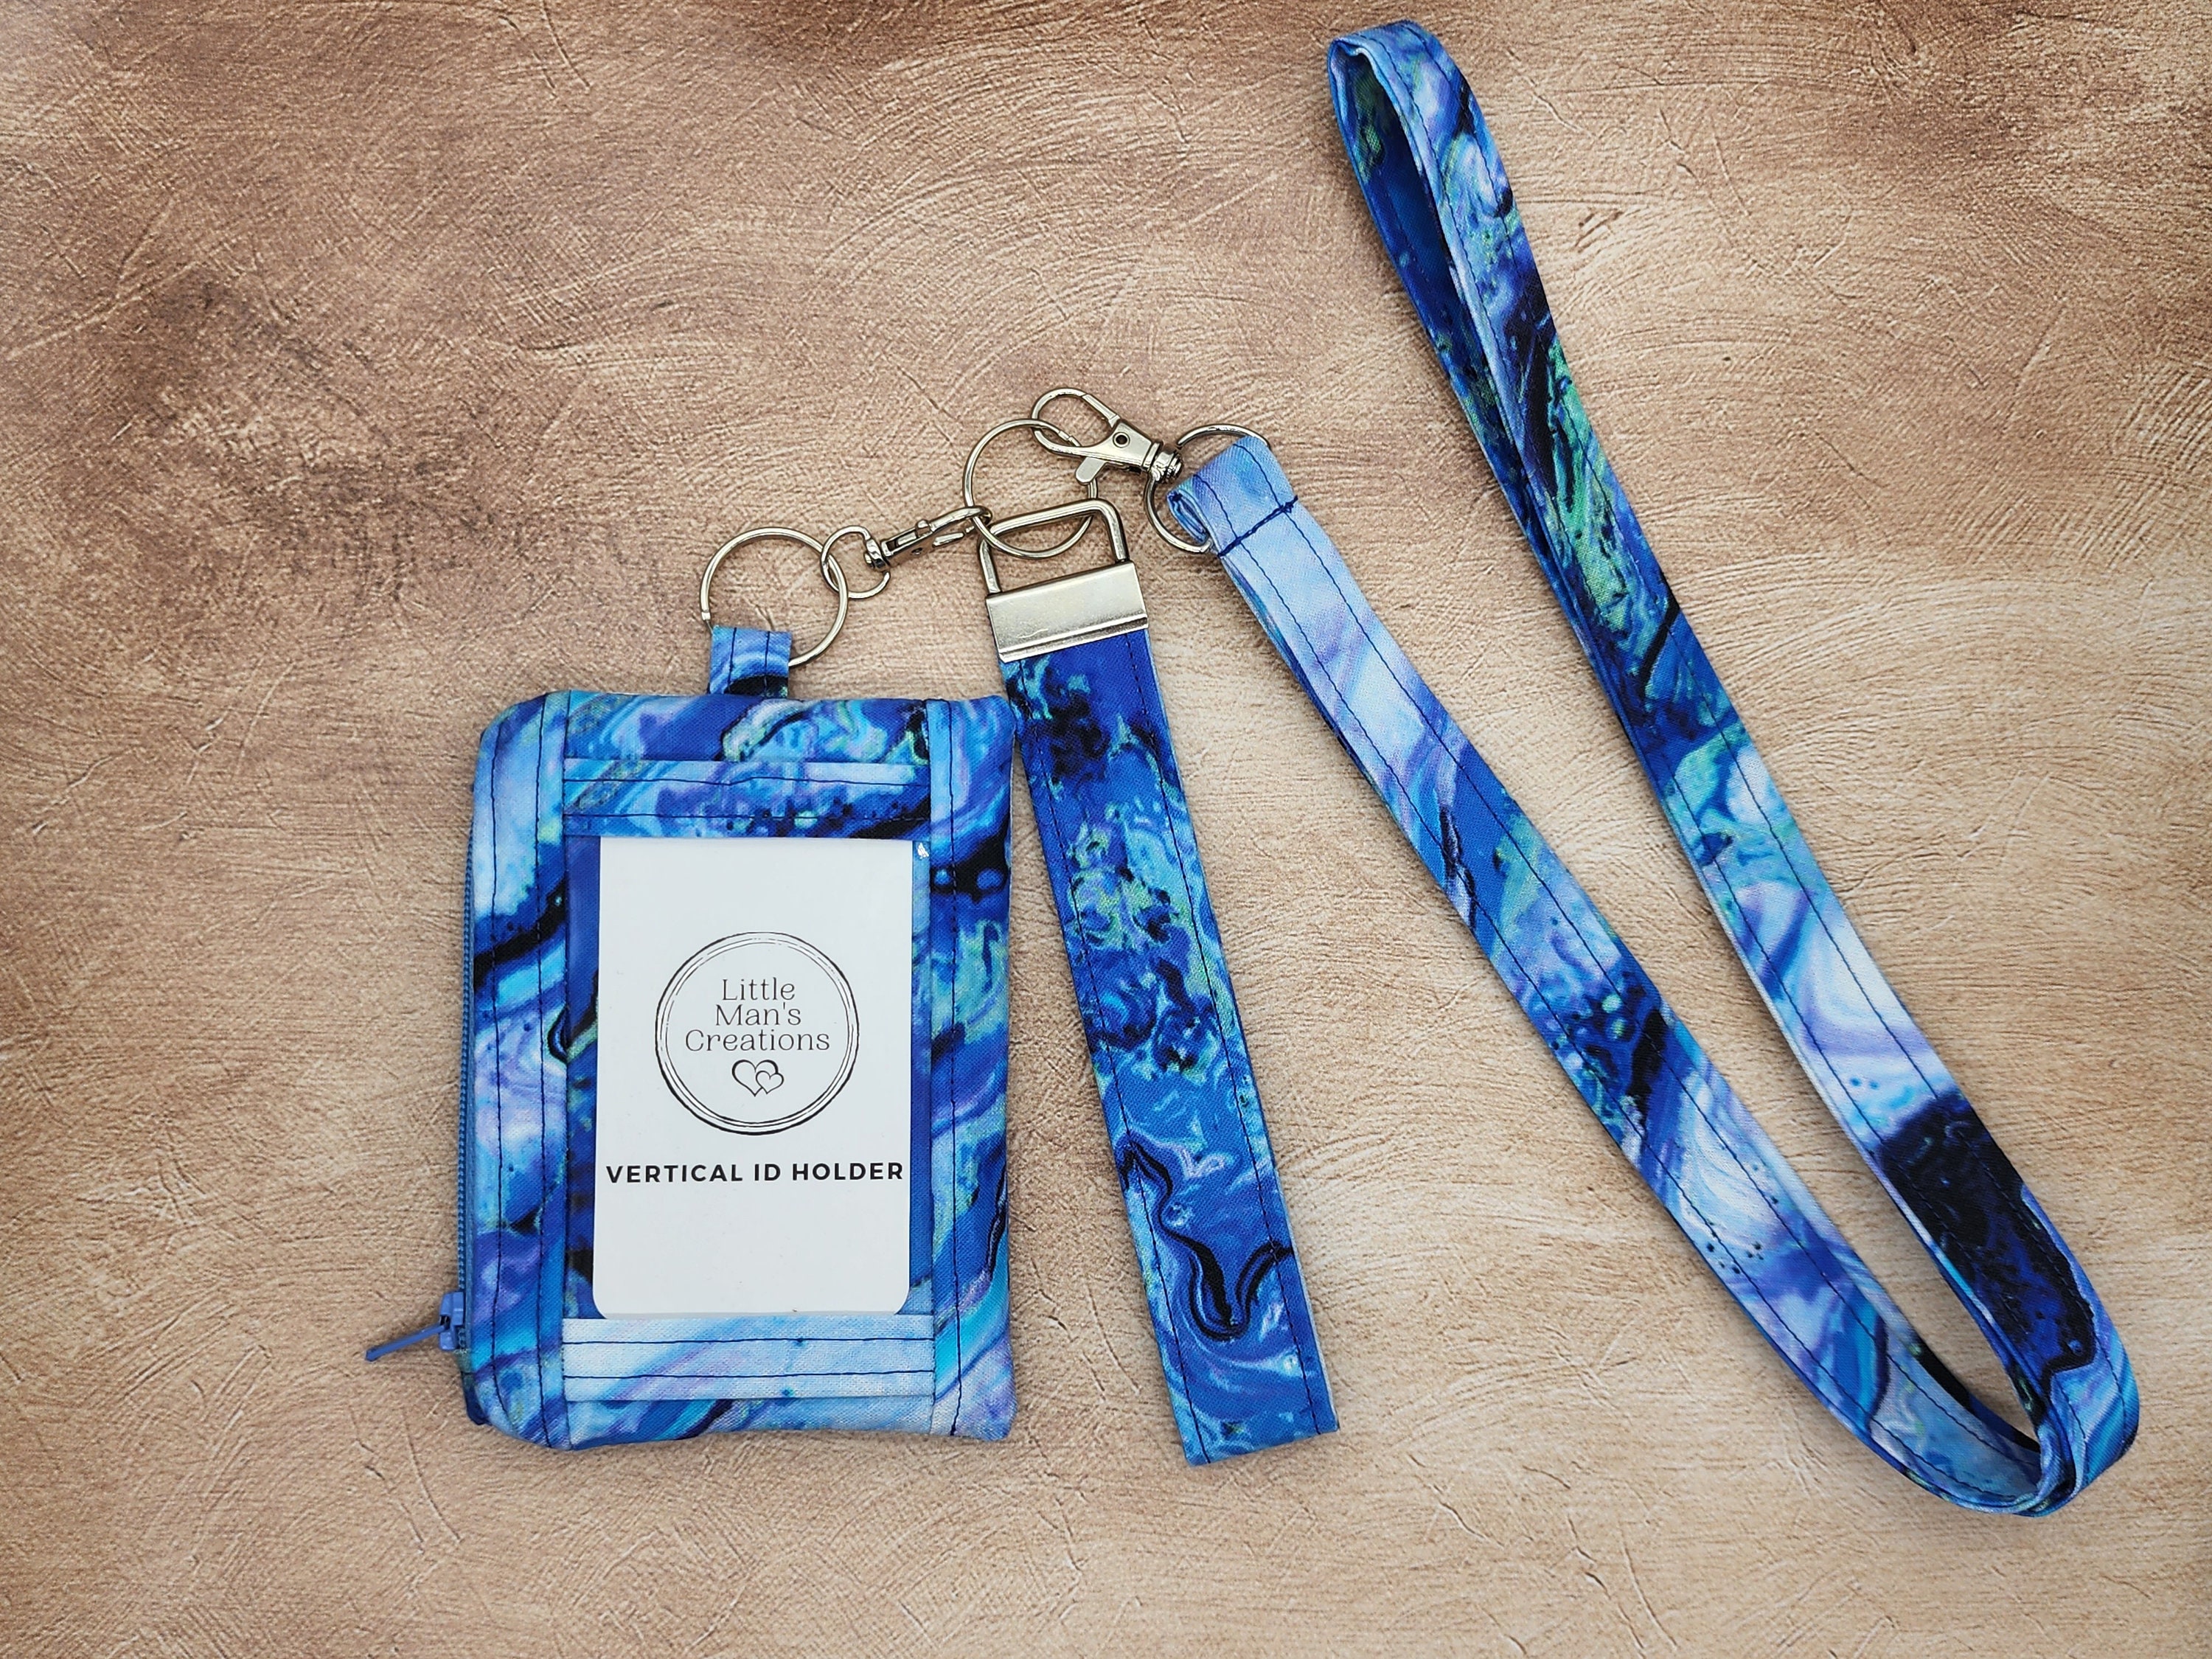 PF958 Gene DNA Lanyard For Keychain ID Card Cover Pass student